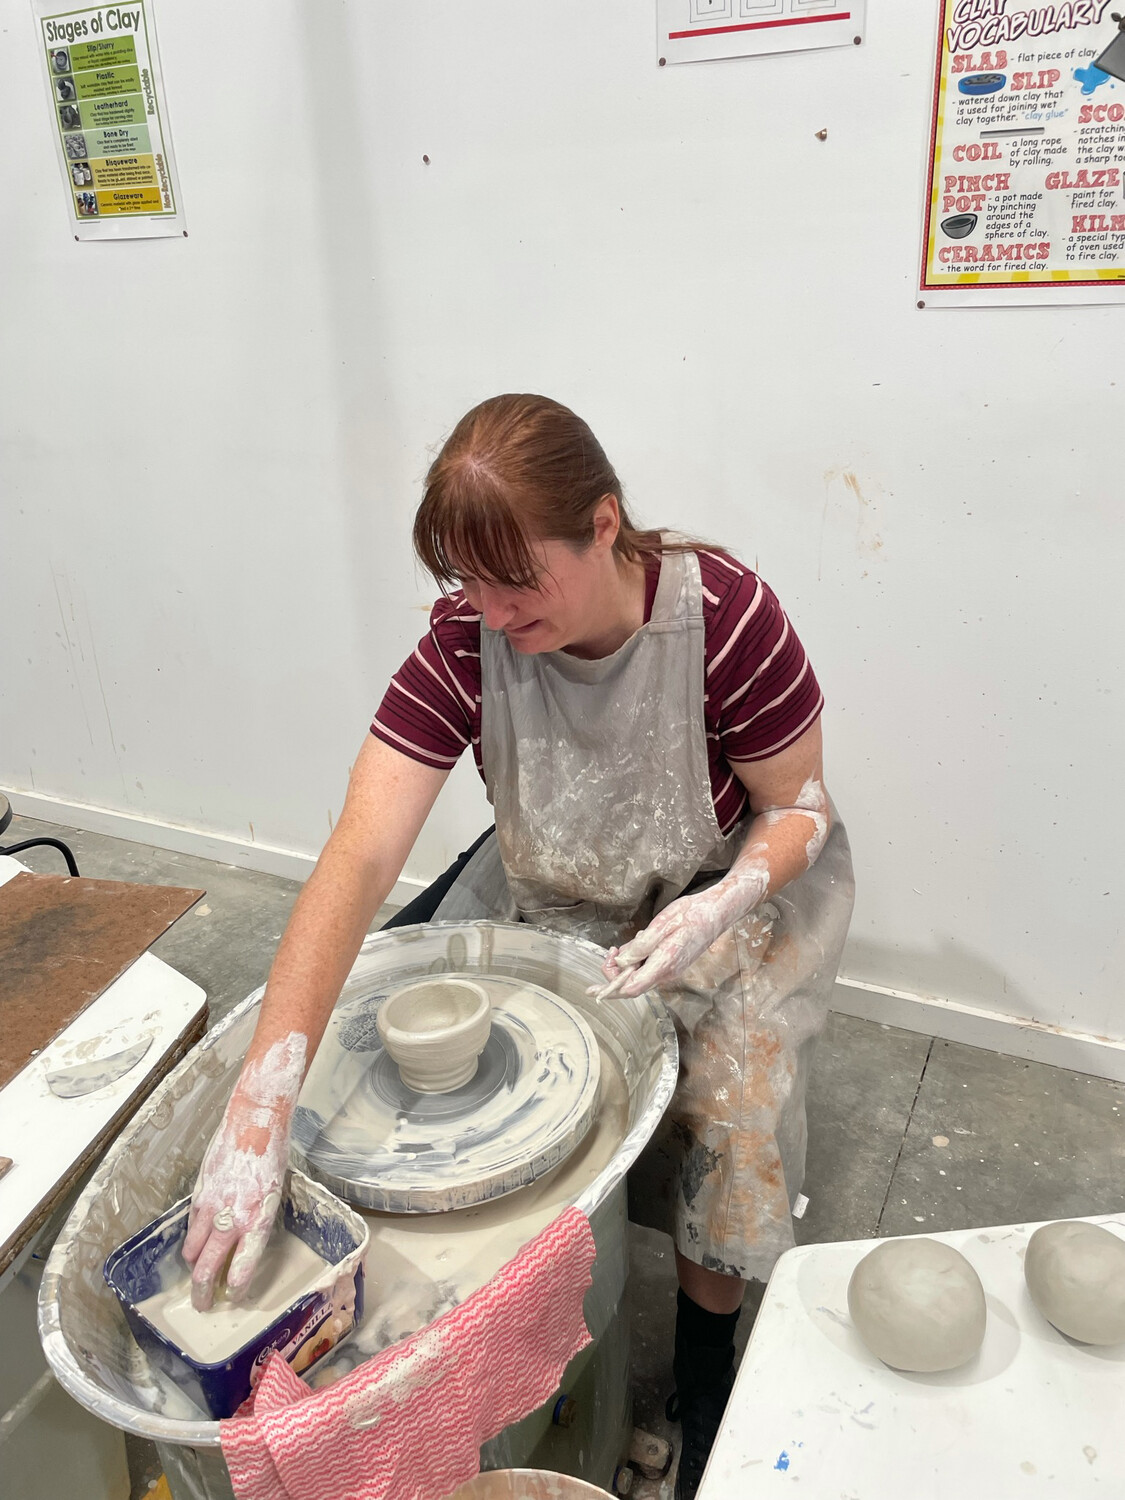 Slip, Spin & Sculpt! 4 week Pottery course Friday 10th June 12:30-2:30pm